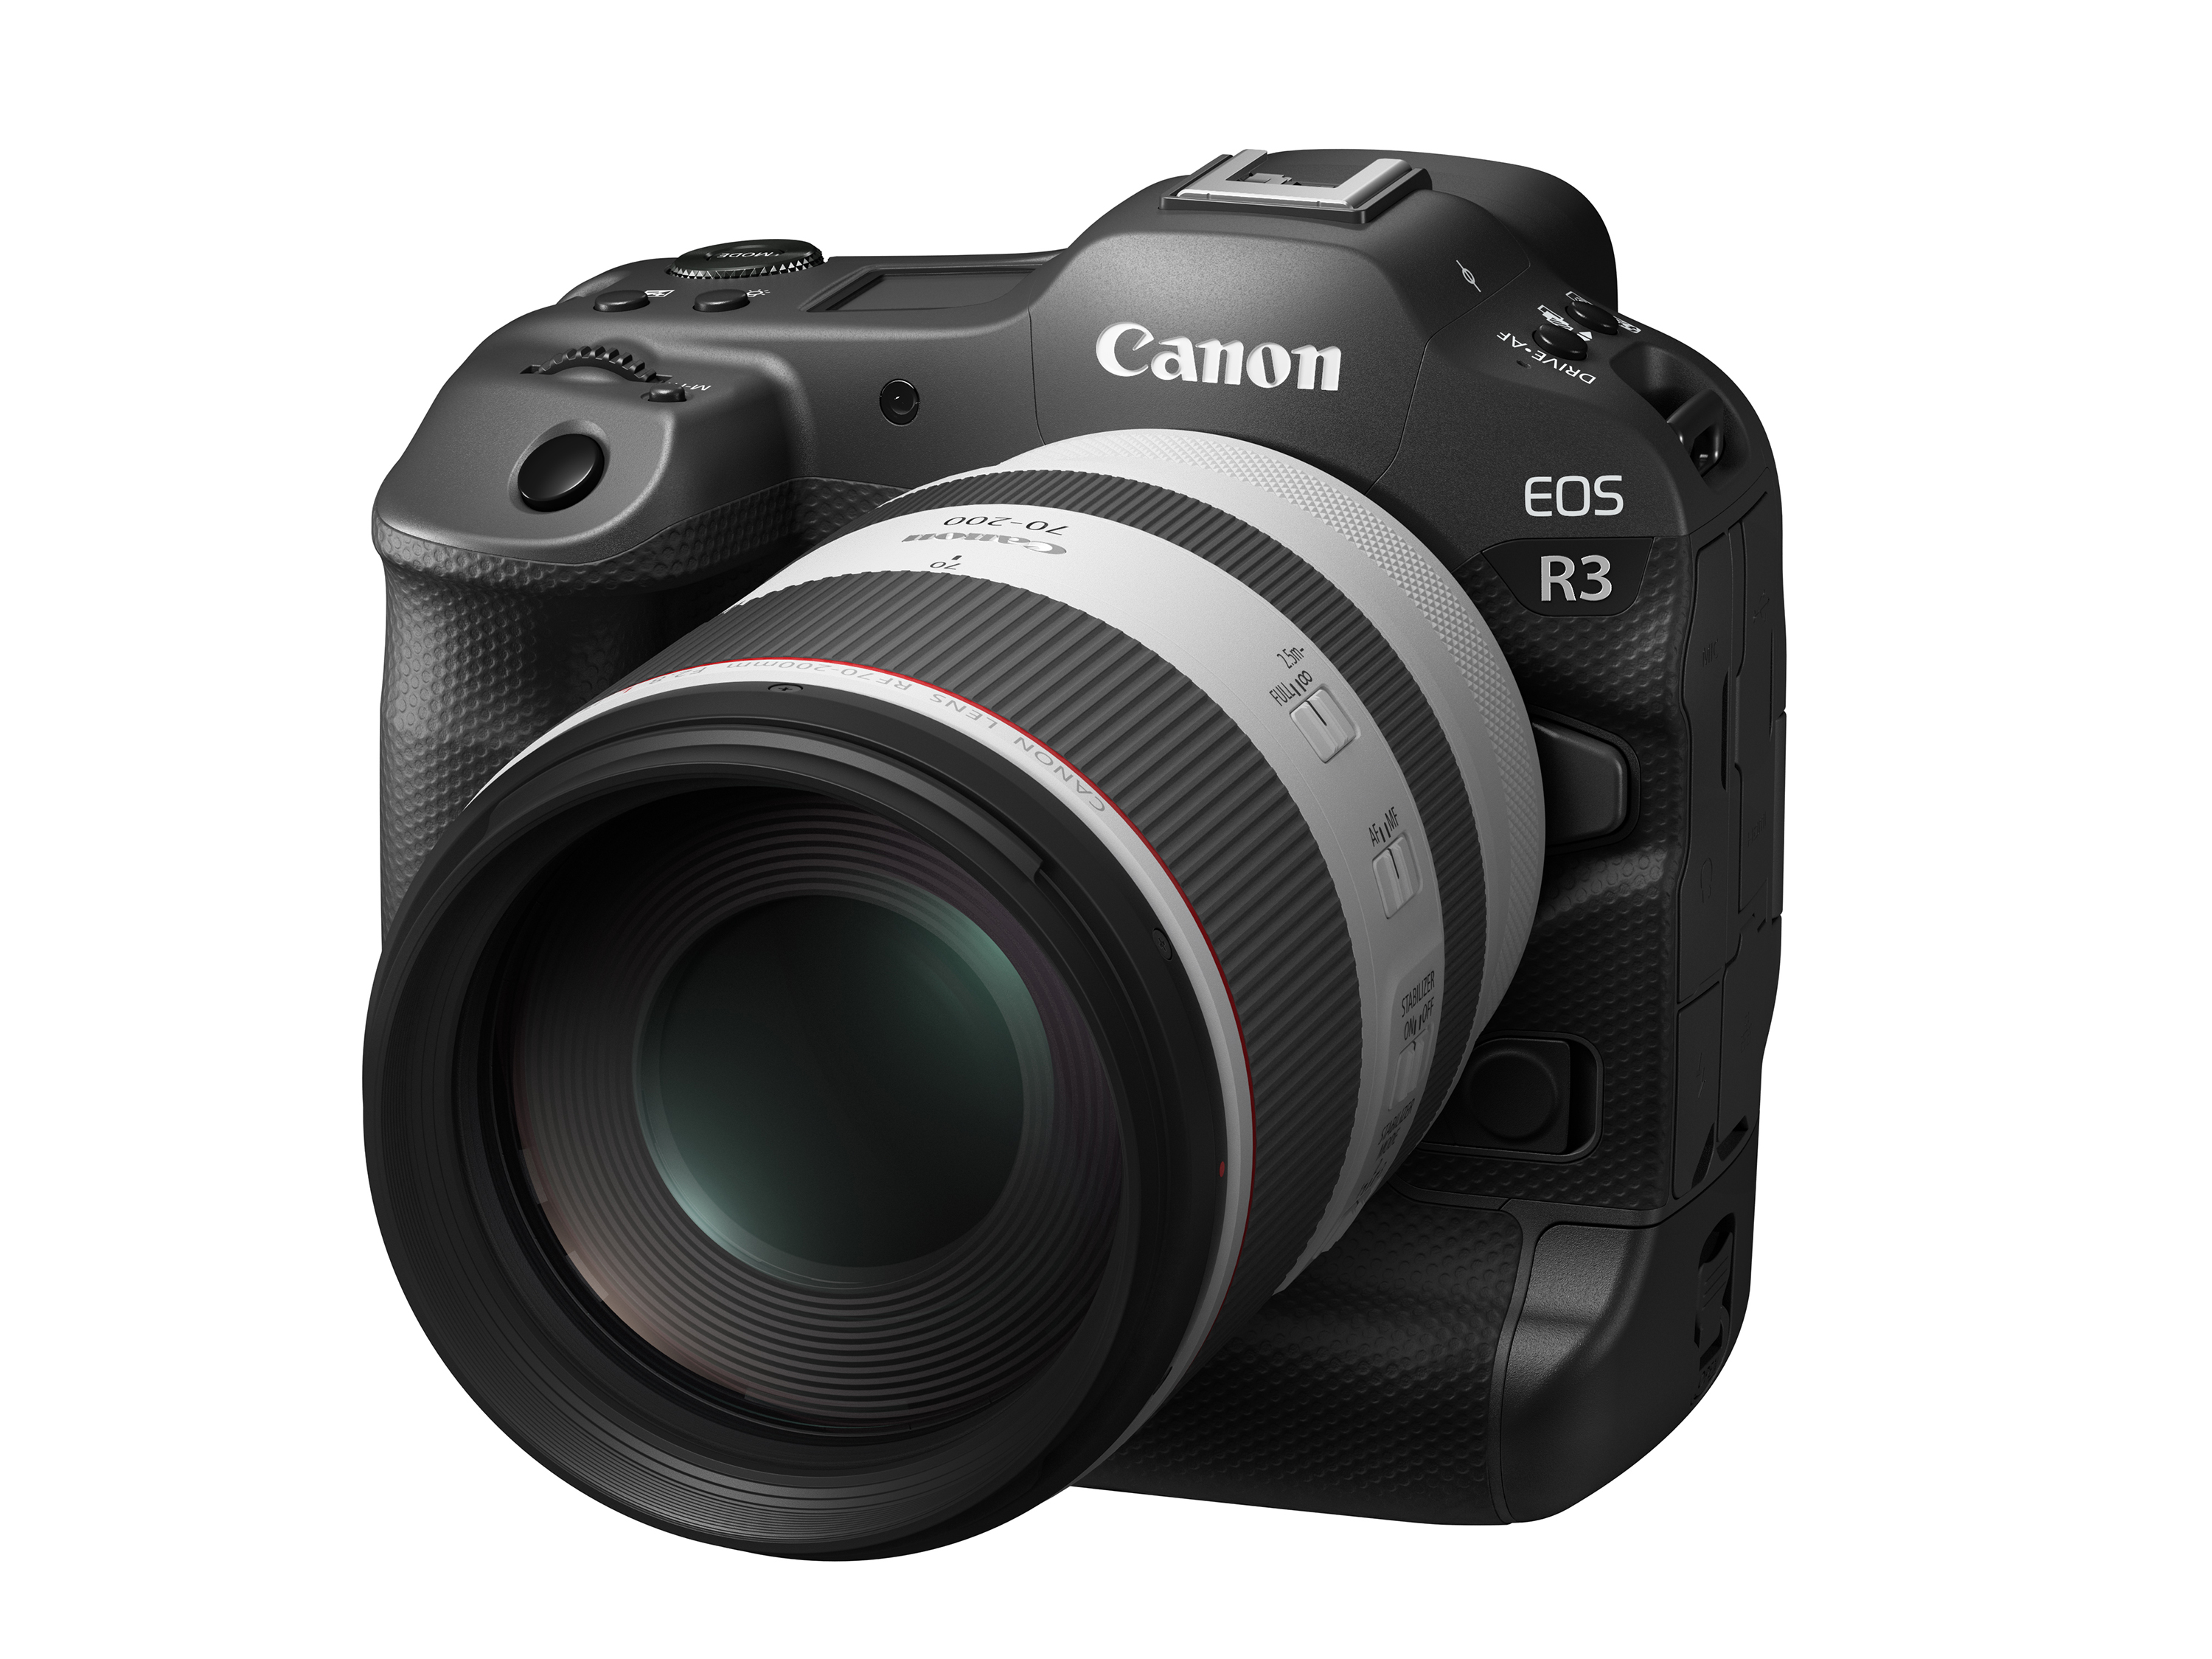 Is The Canon EOS R3 Sensor Being Made by Sony?